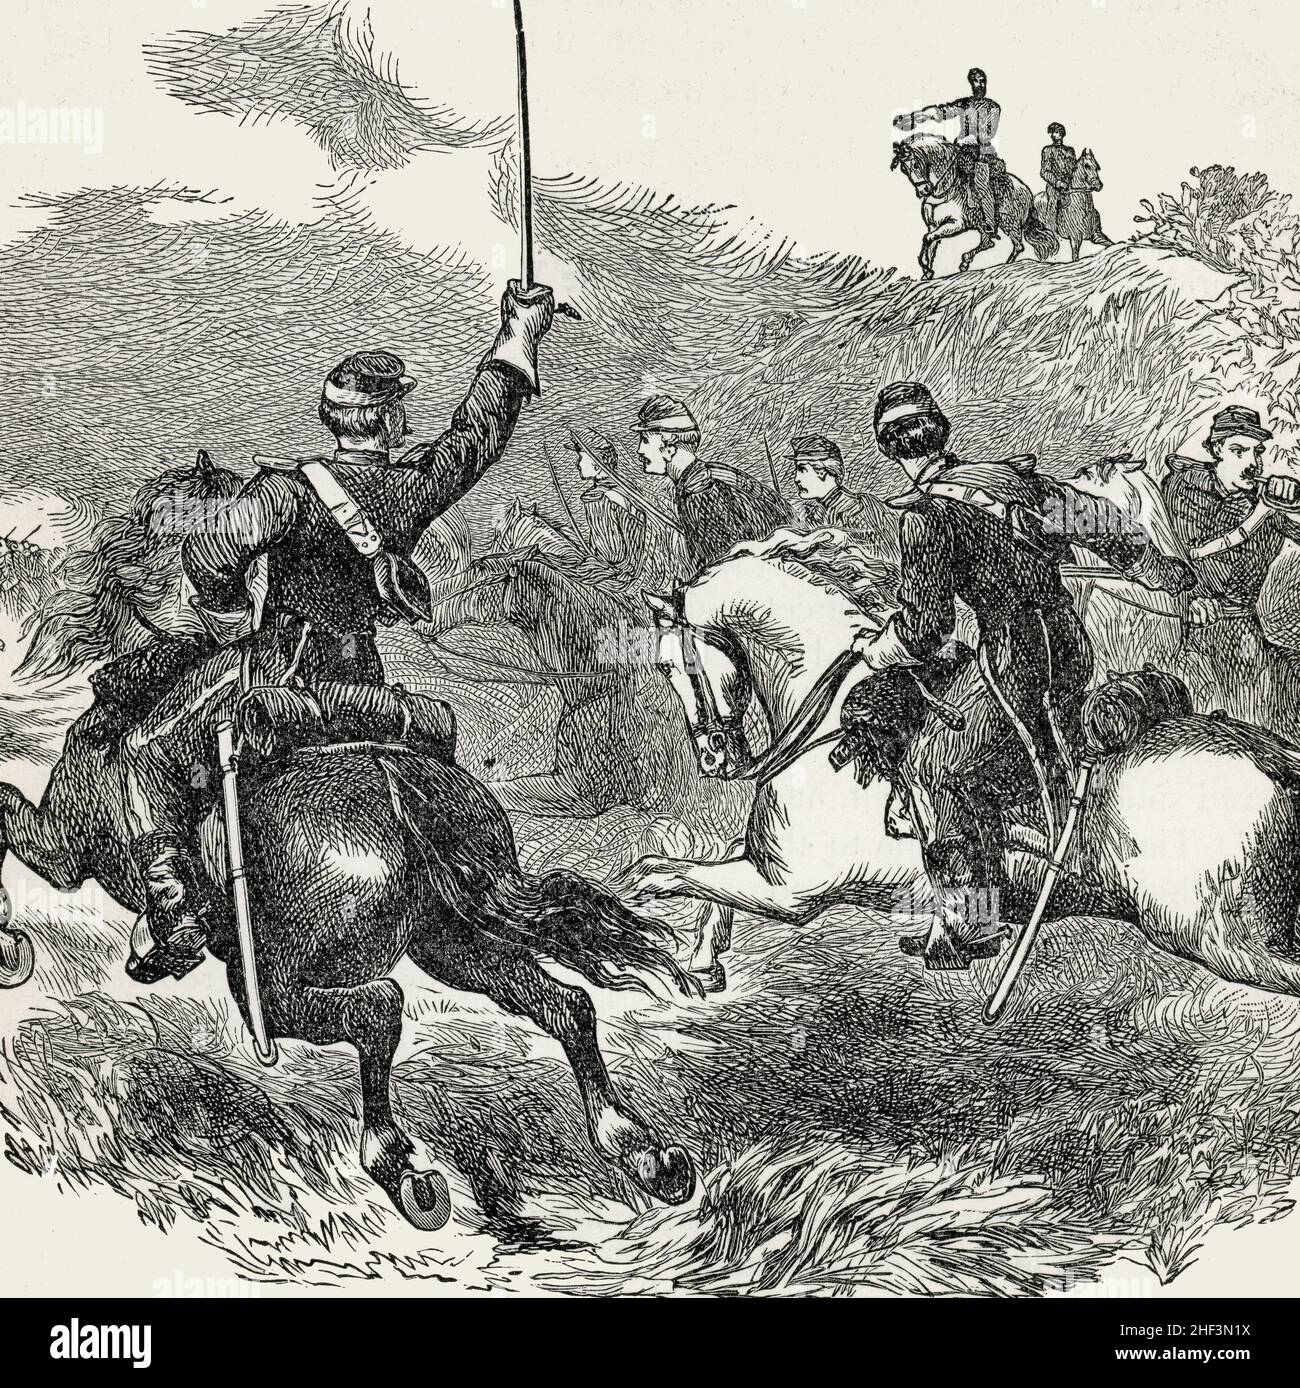 General Sheridan turning defeat into victory at Cedar Creek during the American Civil War Stock Photo